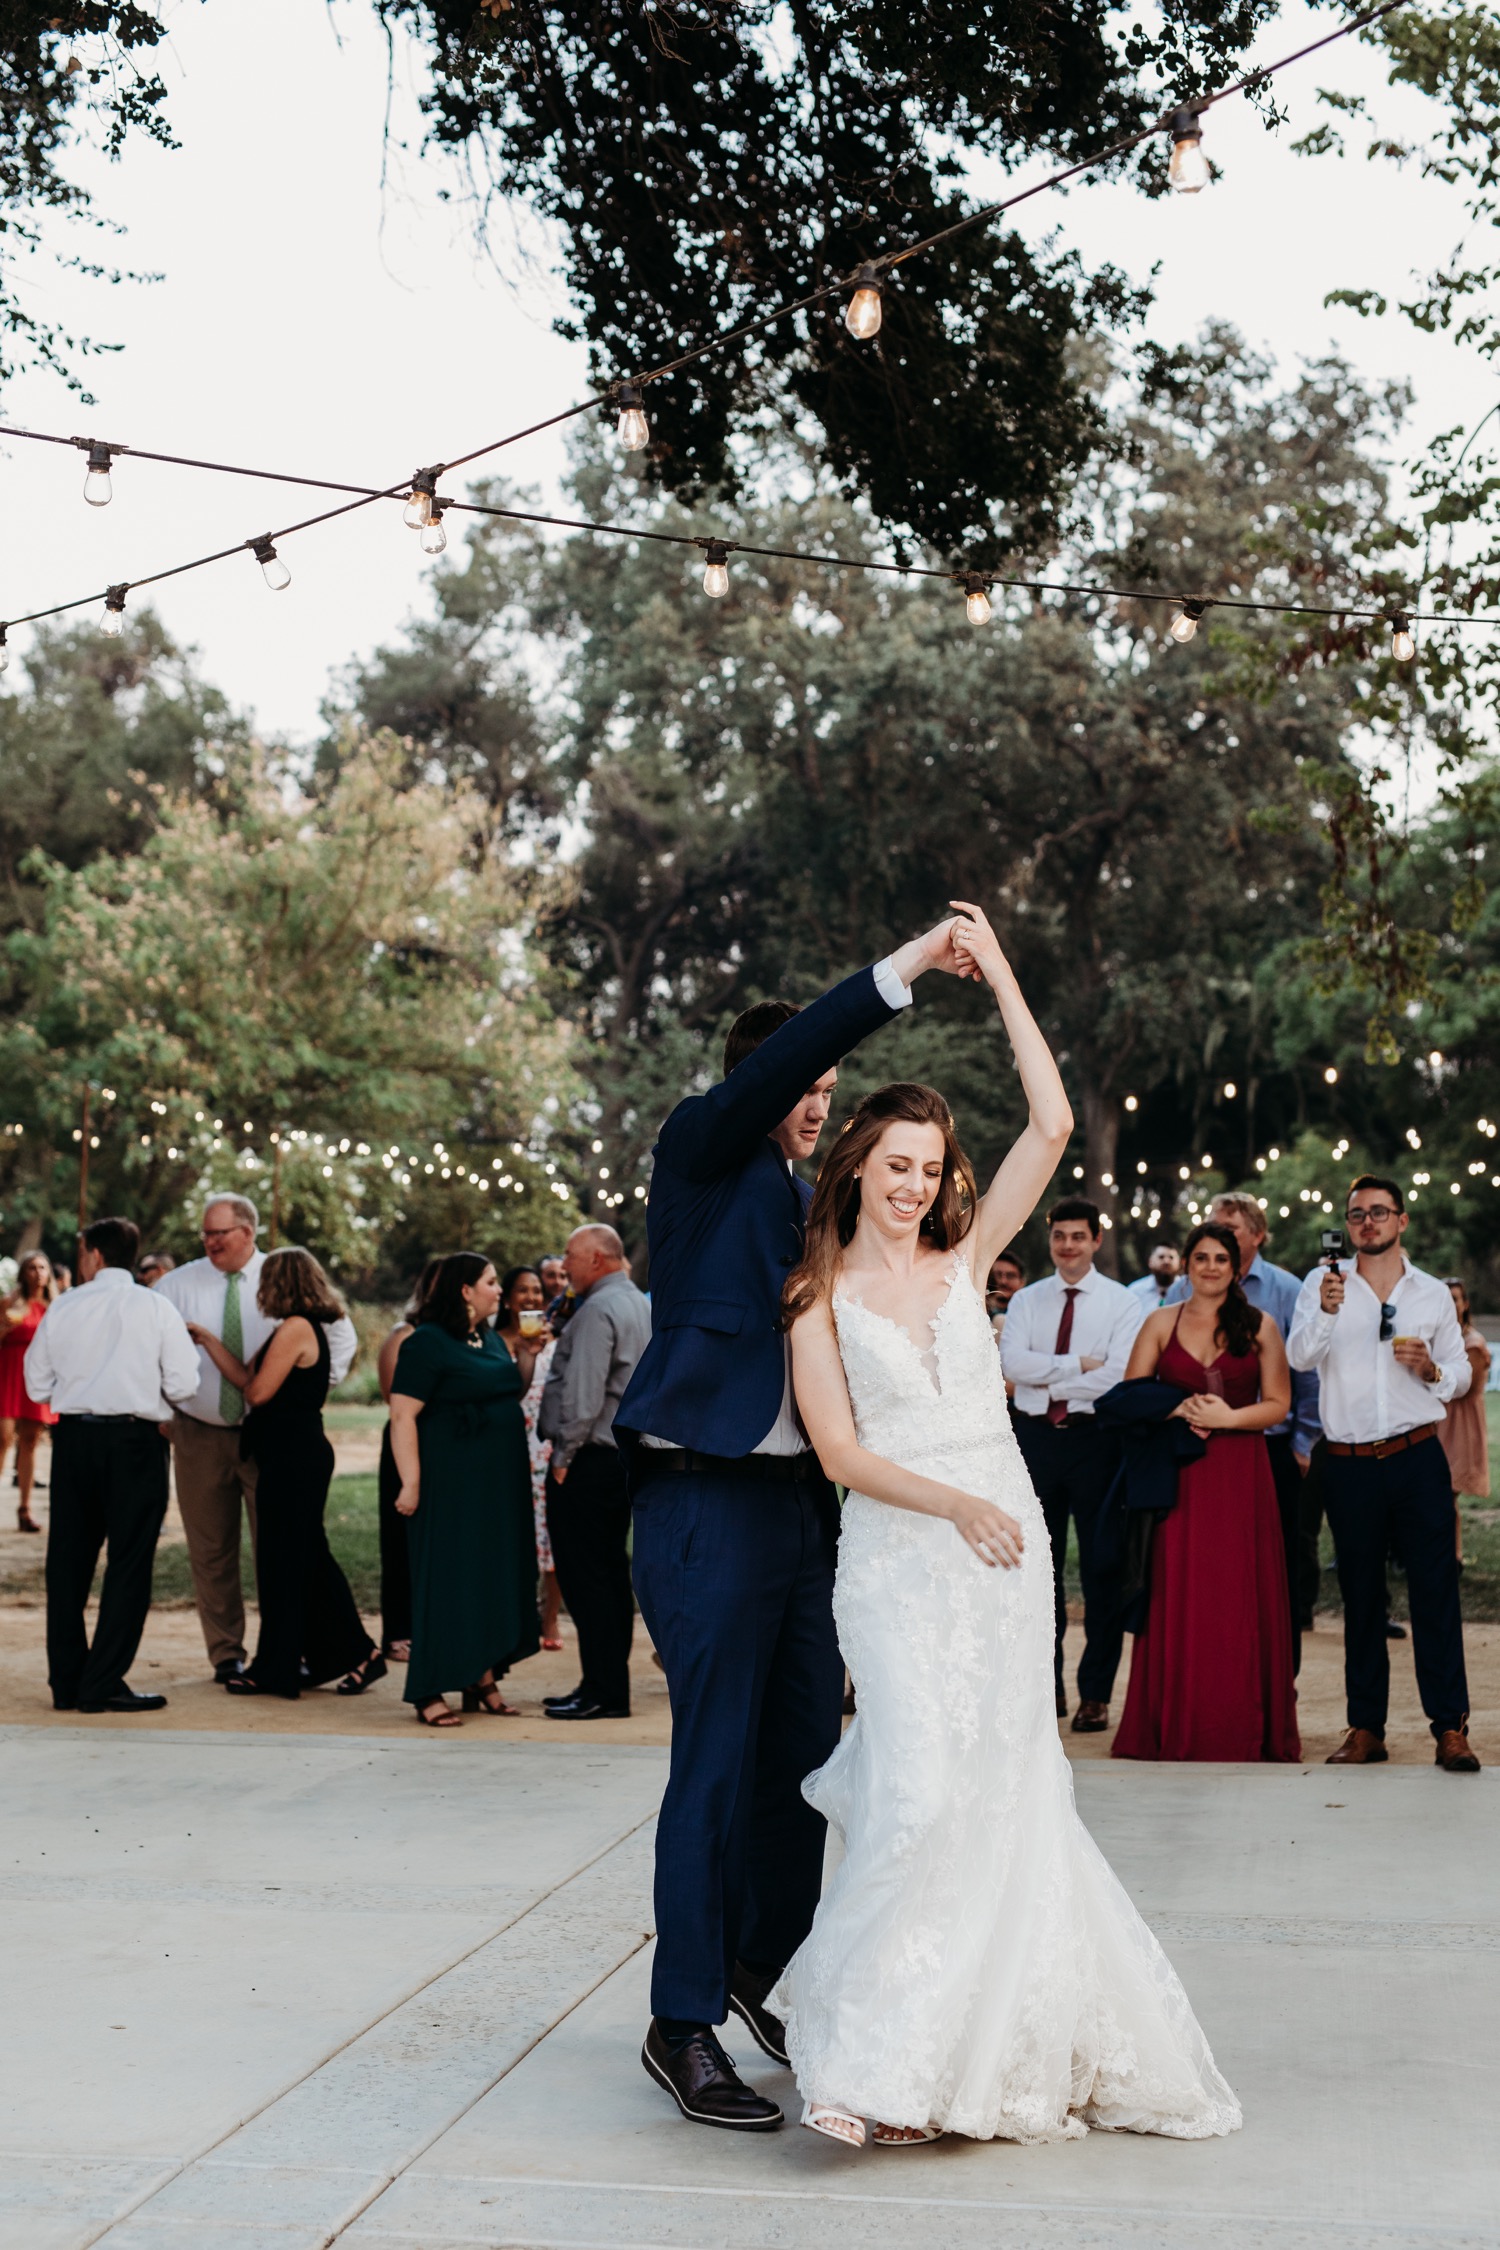 Bride and groom's first dance under the lights at The Maples in Woodland, CA